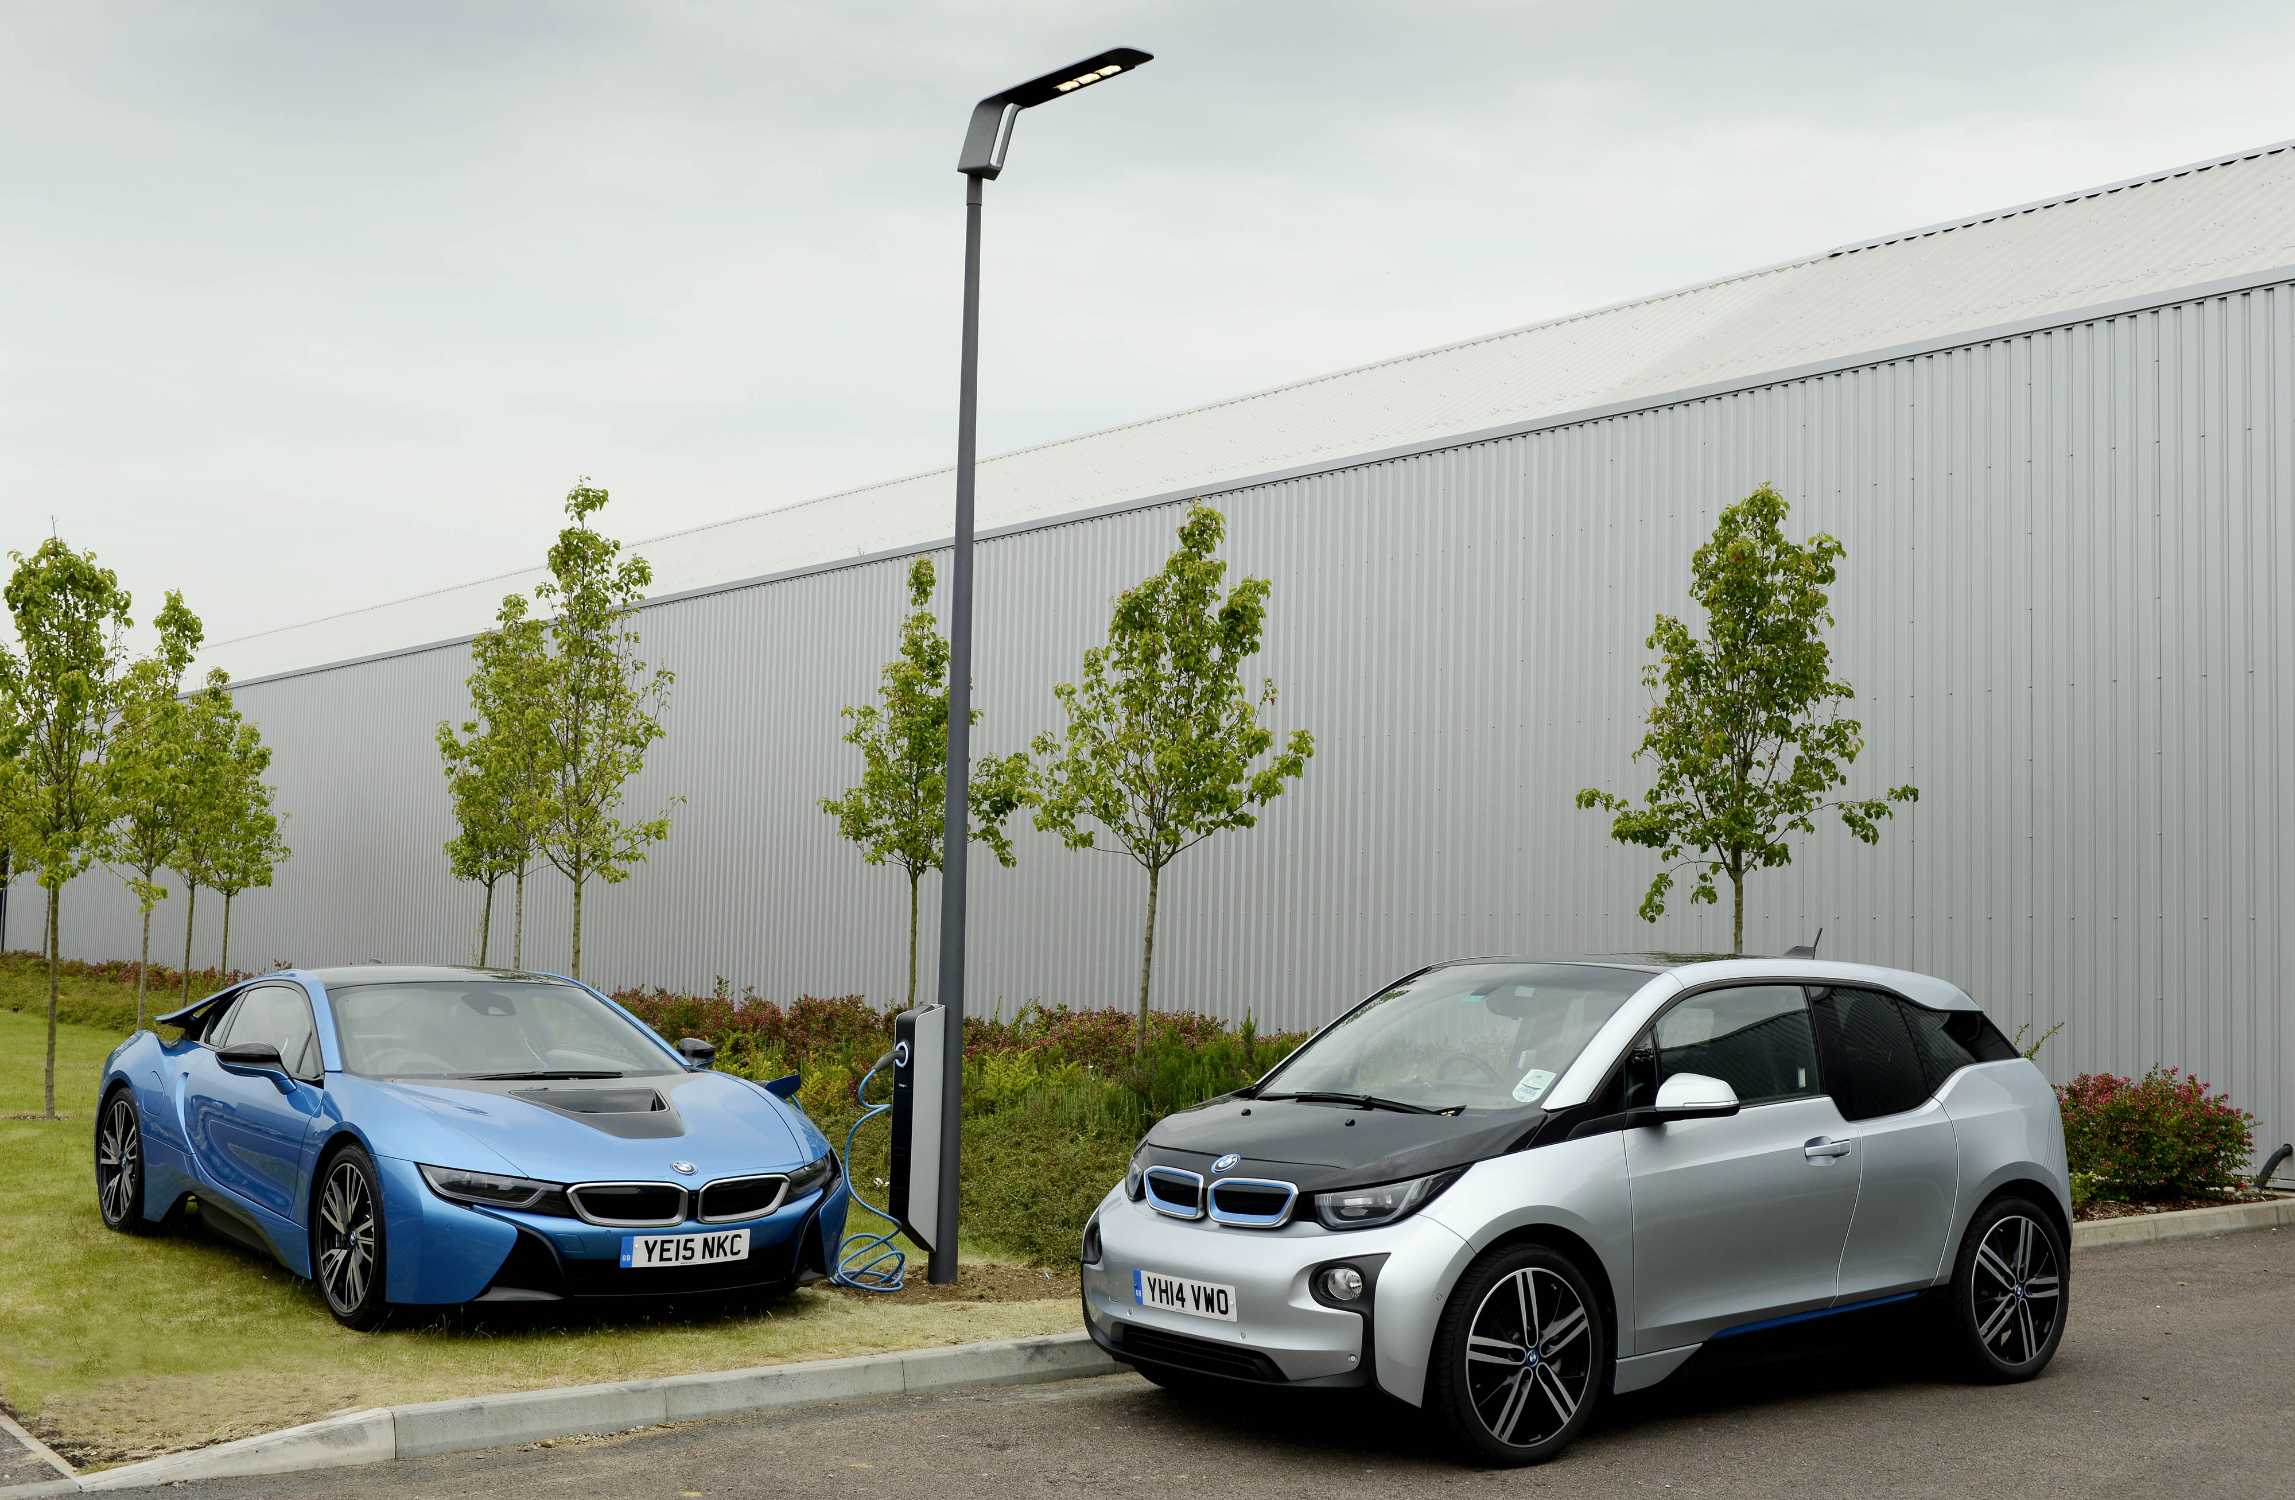 P90187395-bmw-i8-and-bmw-i3-next-to-light-and-charge-lamppost-2295px.jpg